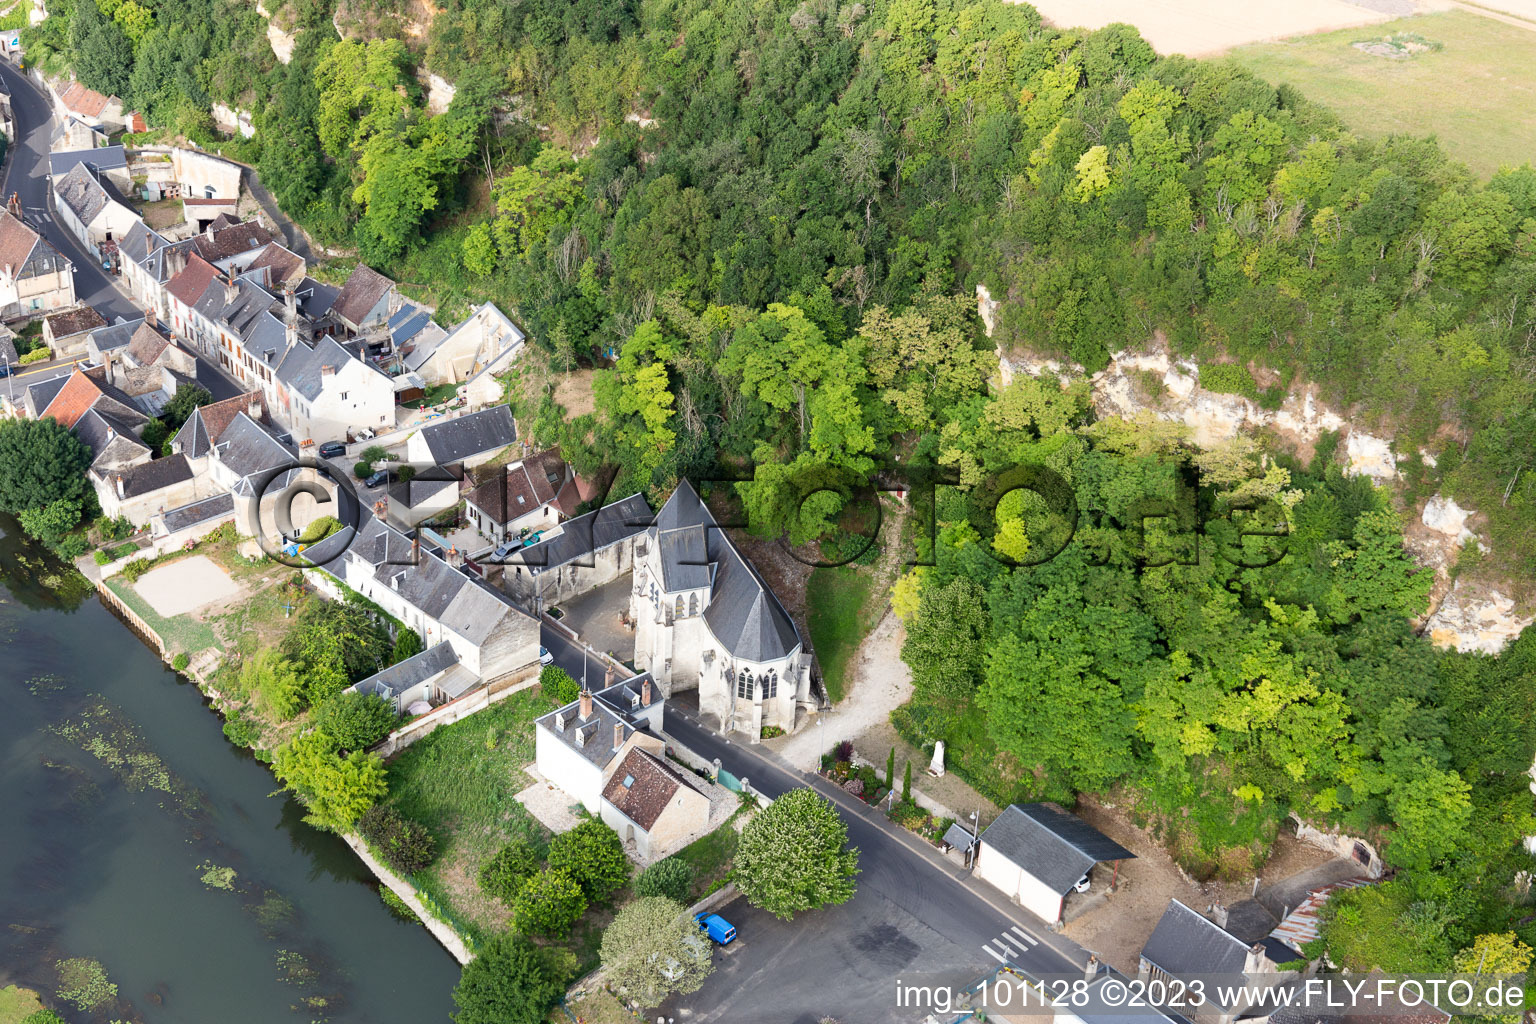 Saint-Rimay in the state Loir et Cher, France from the drone perspective